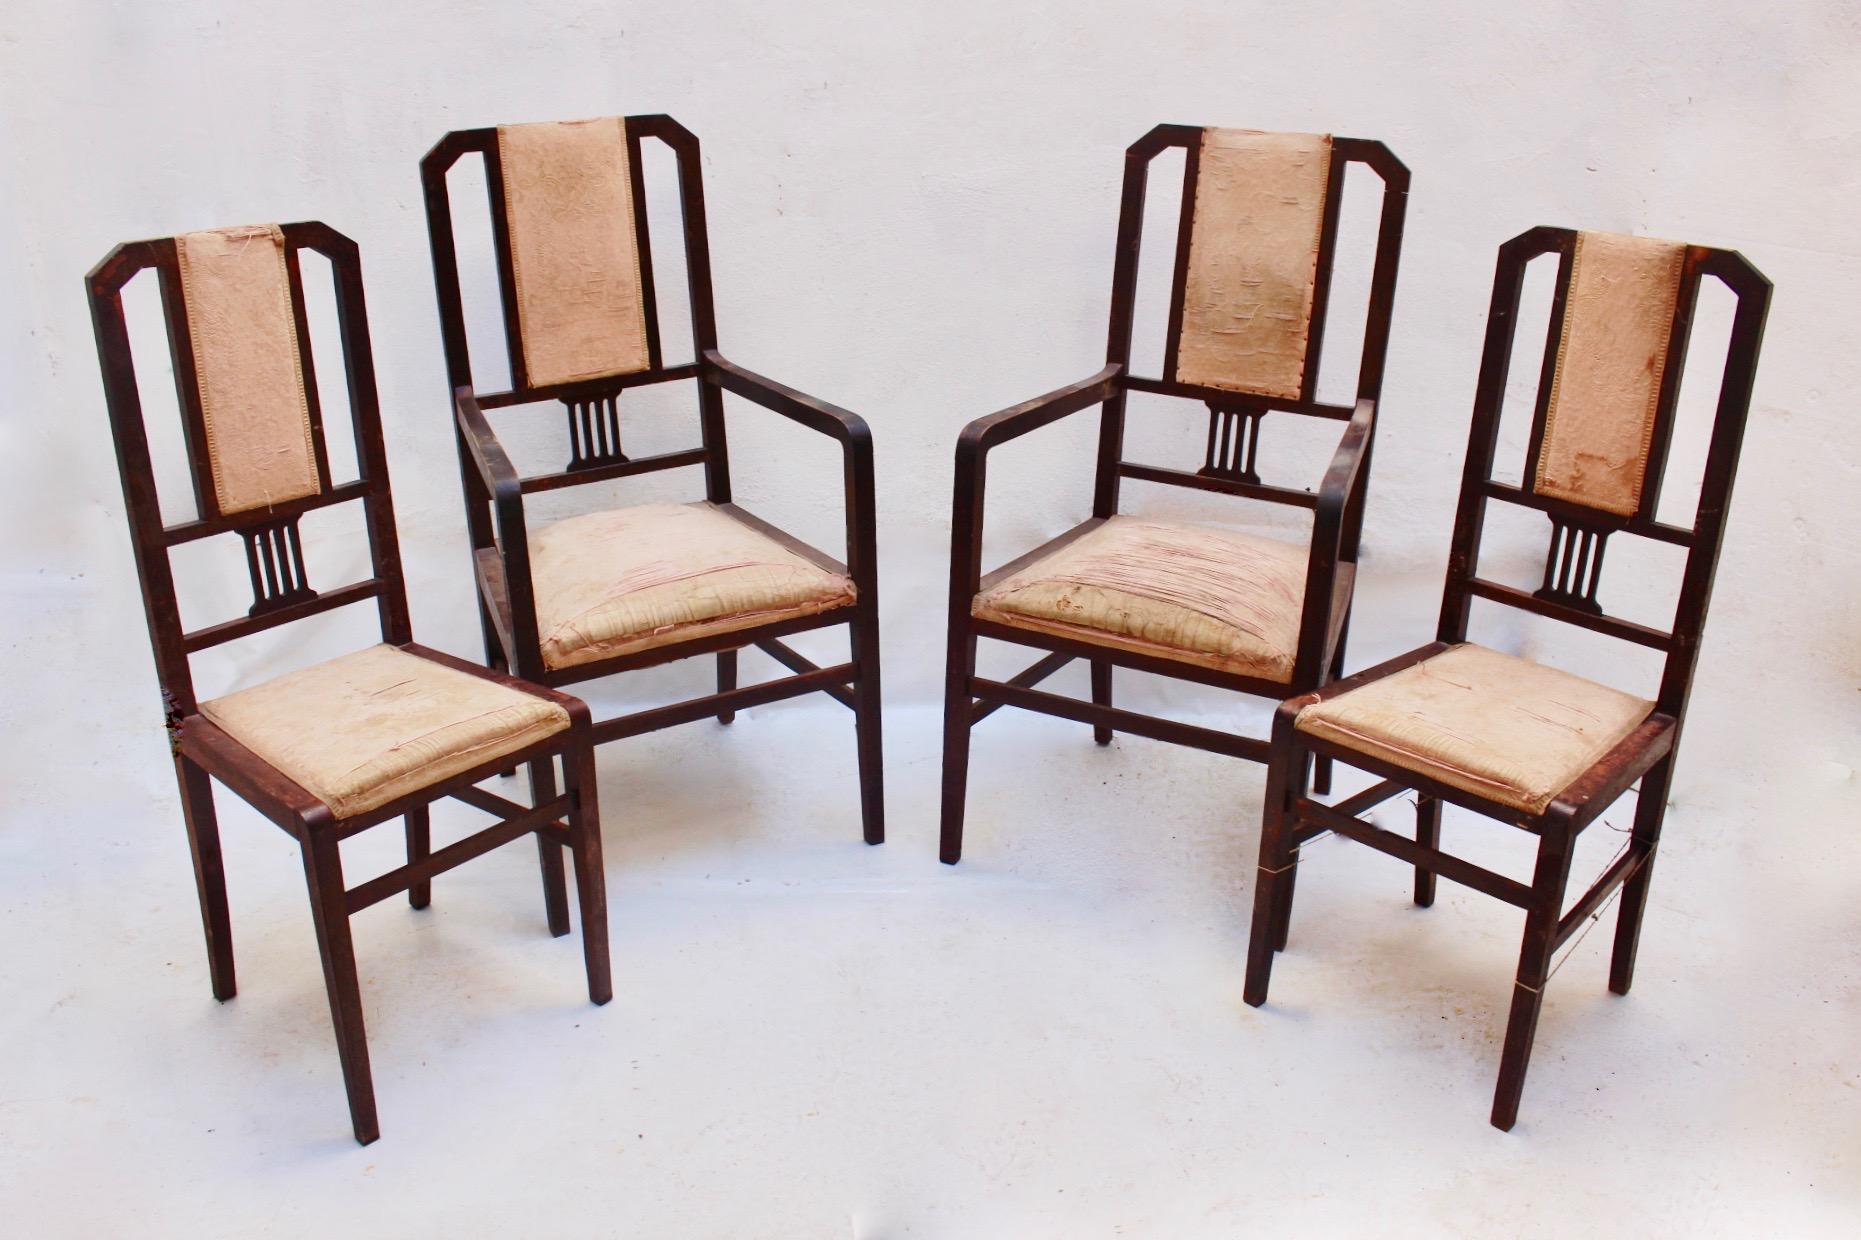 Art Deco Beech Living Room Set Settee and 4 Chairs, Spain, 1930s For Sale 2